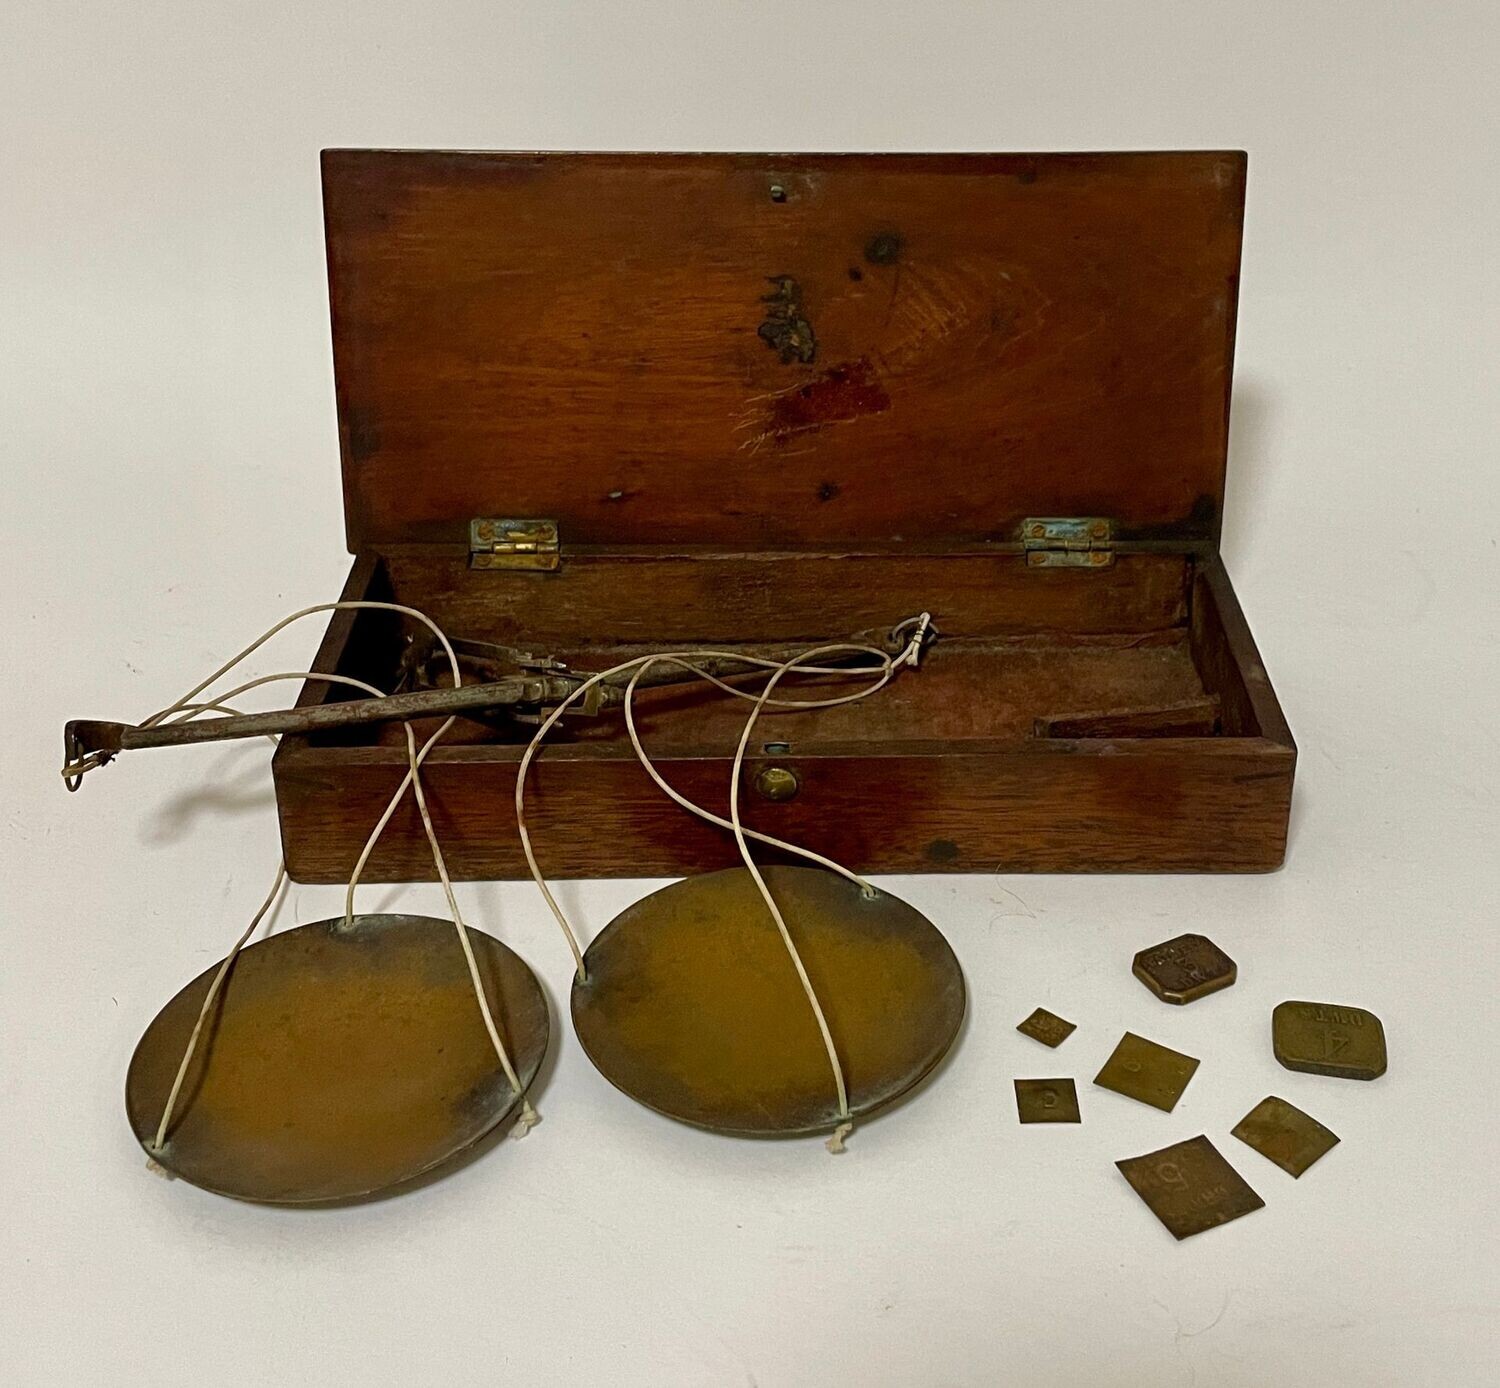 Antique Travelling Apothecary Scales